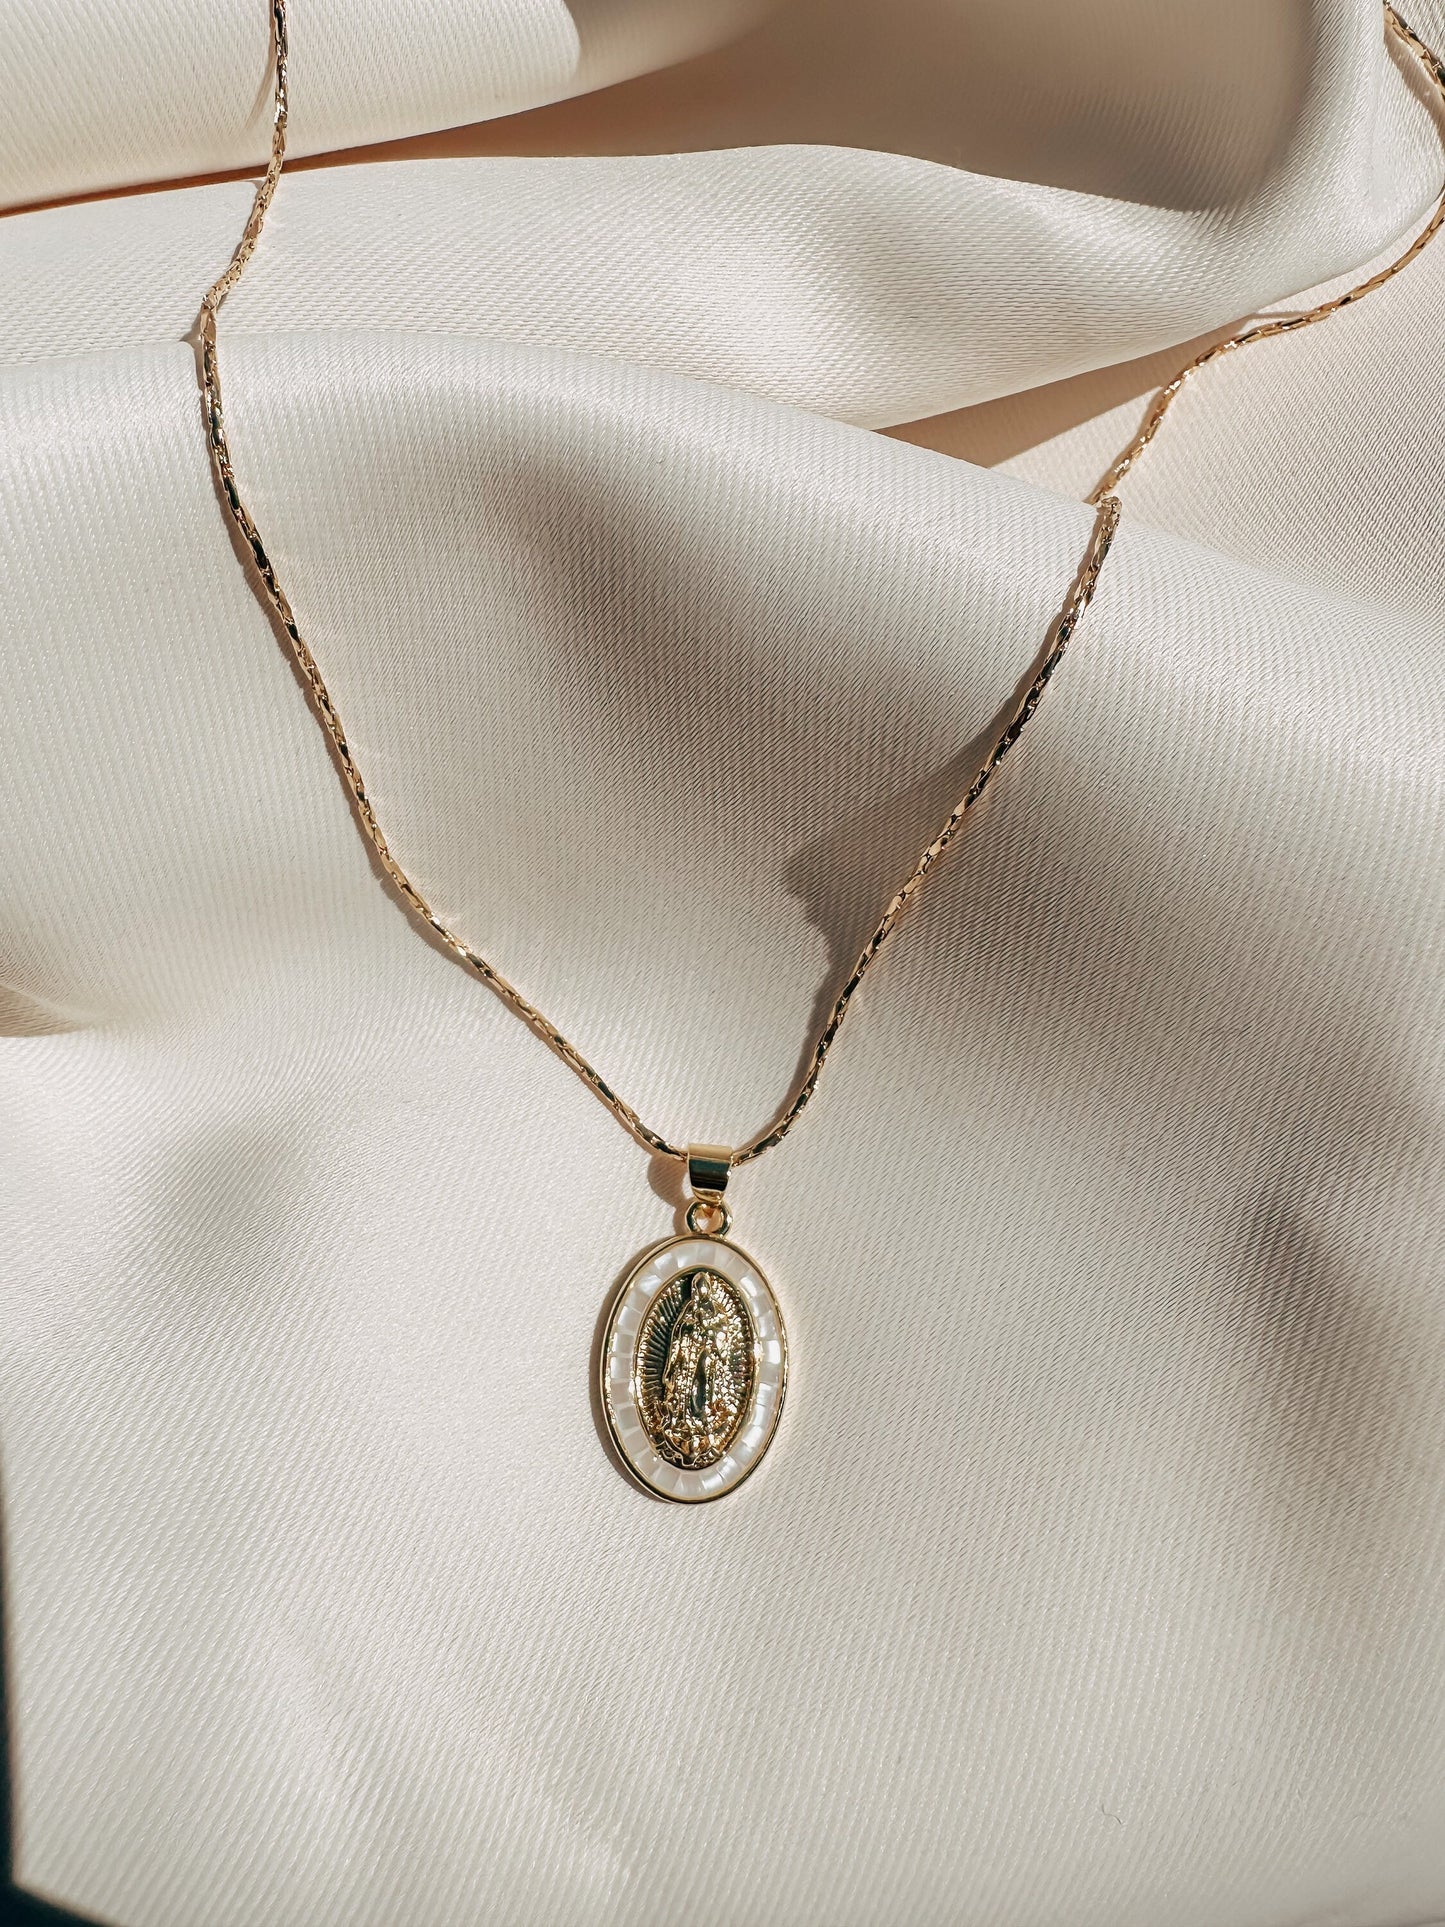 White Virgin Mary Necklace. Gold plated  Virgin Mary necklace gold filled chain cadena de virgencita blanca